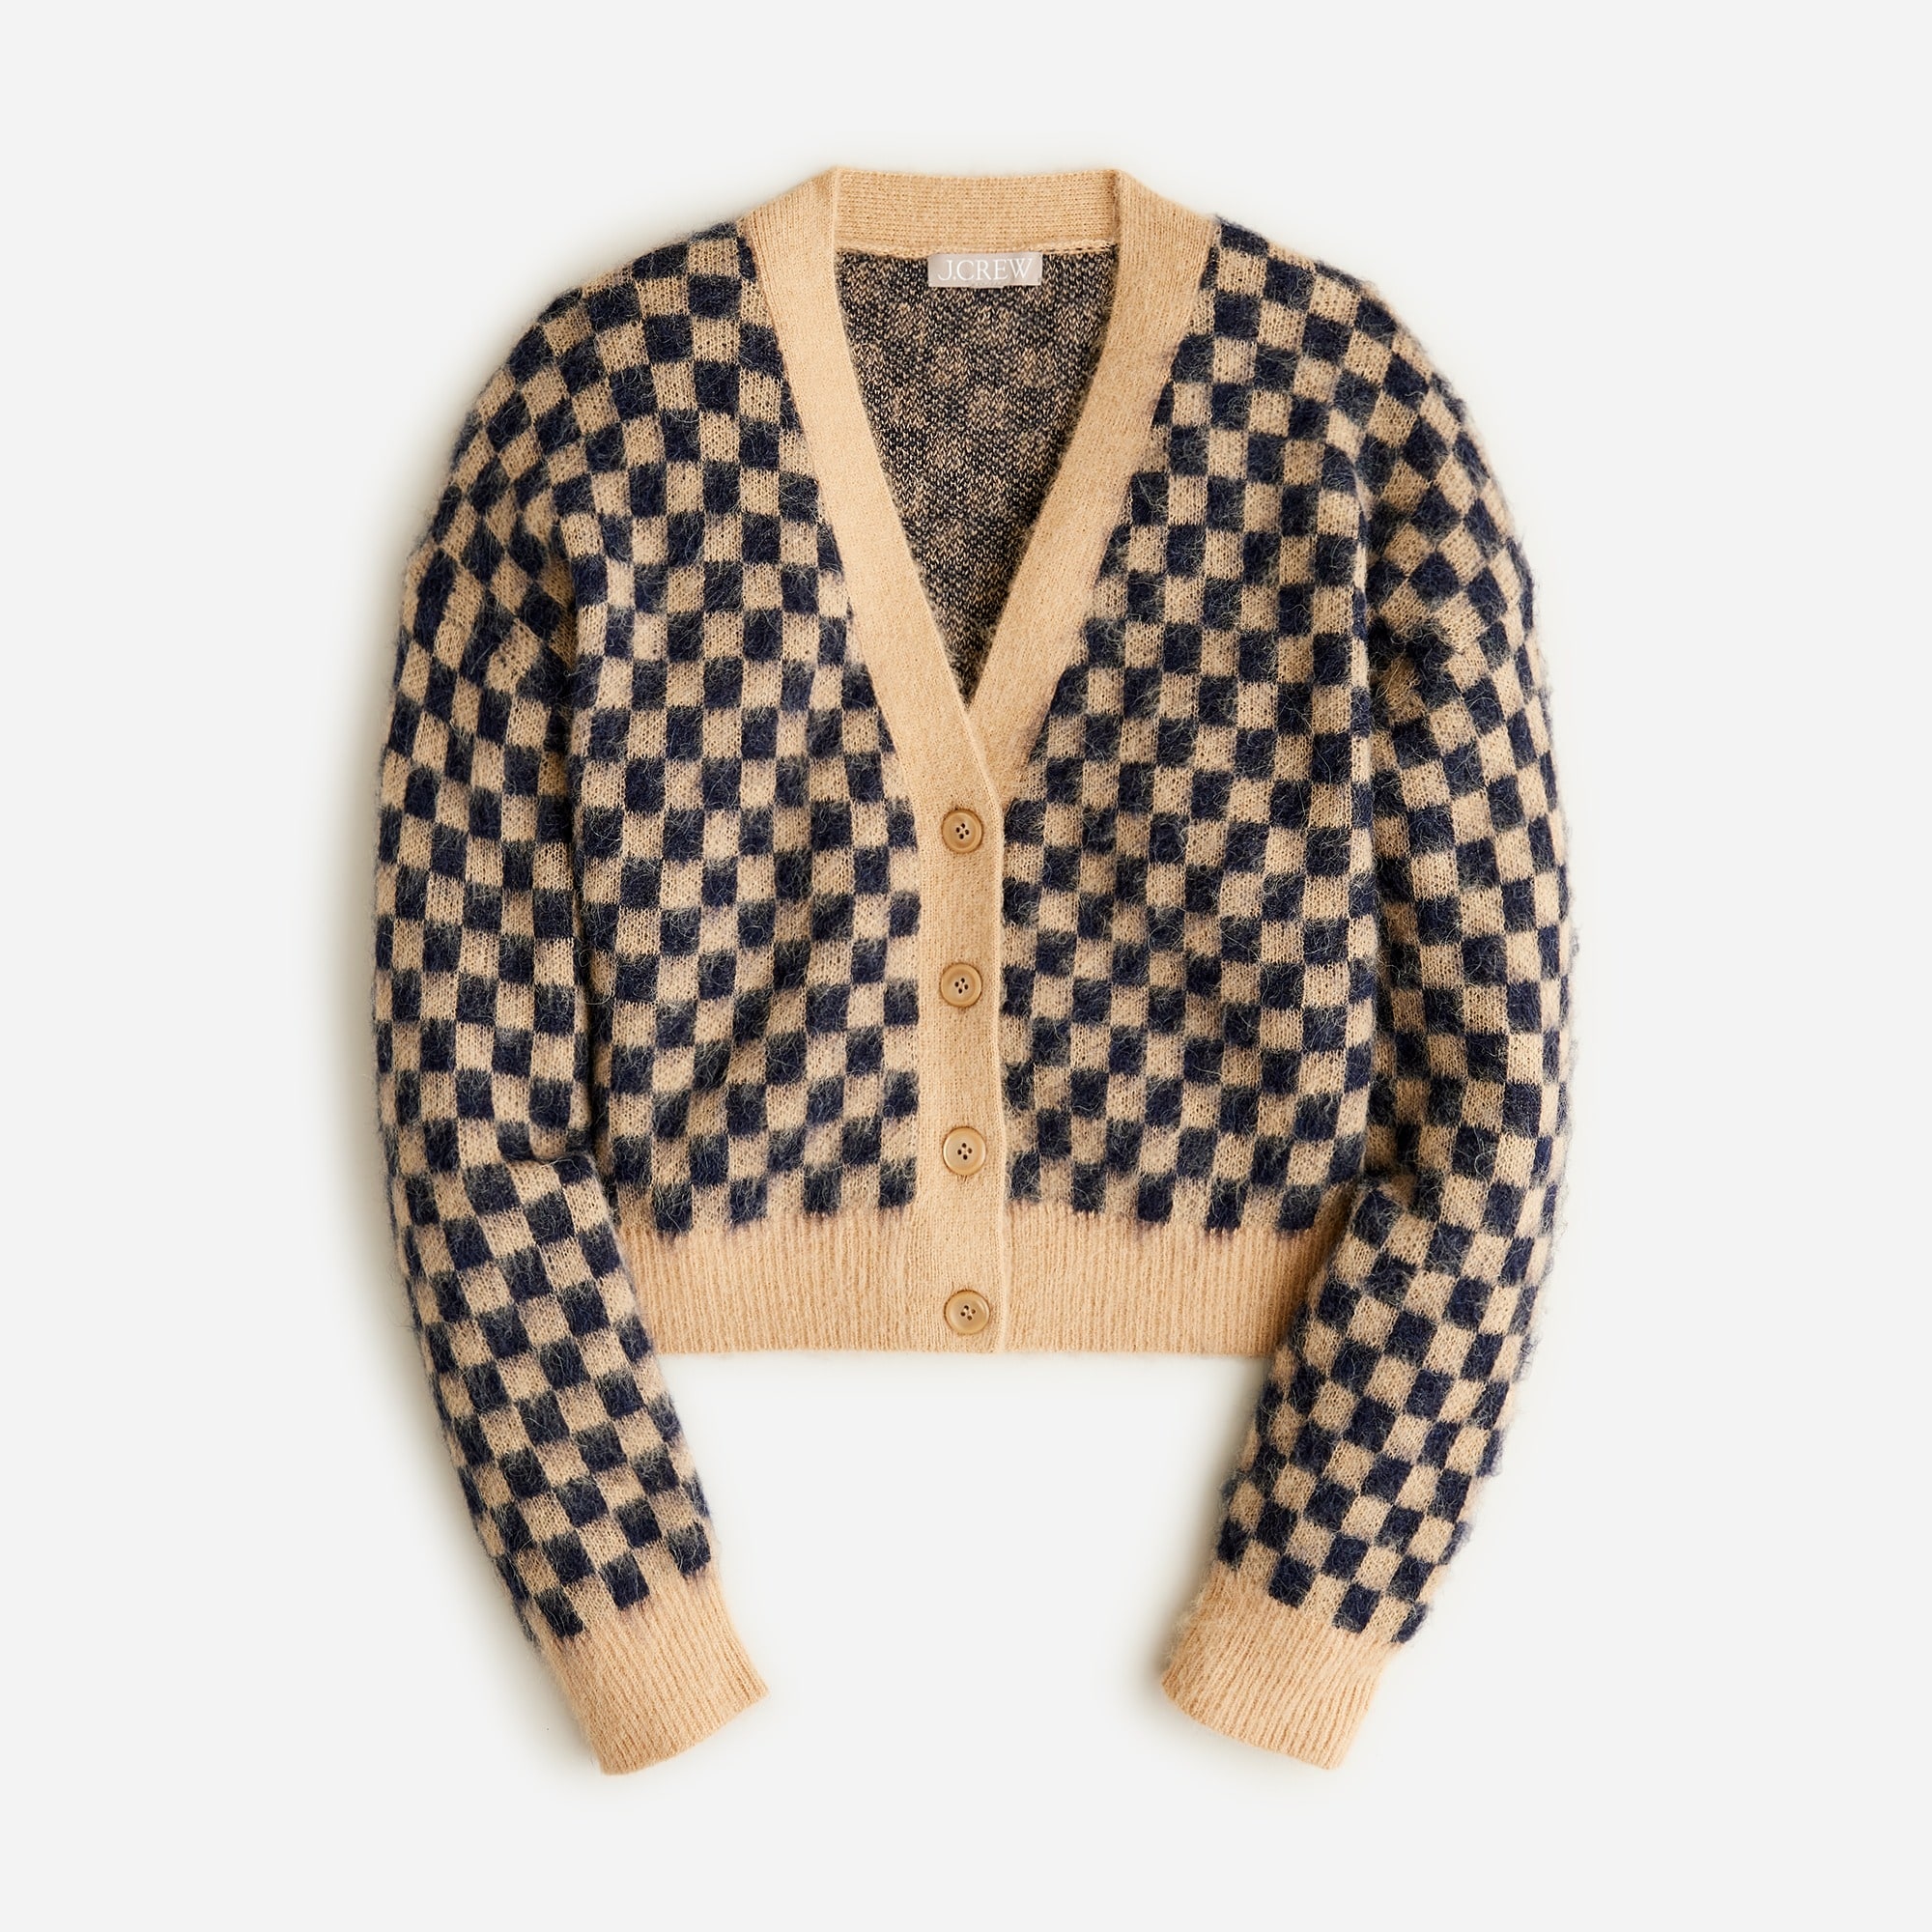  Checkered V-neck cardigan sweater in brushed yarn